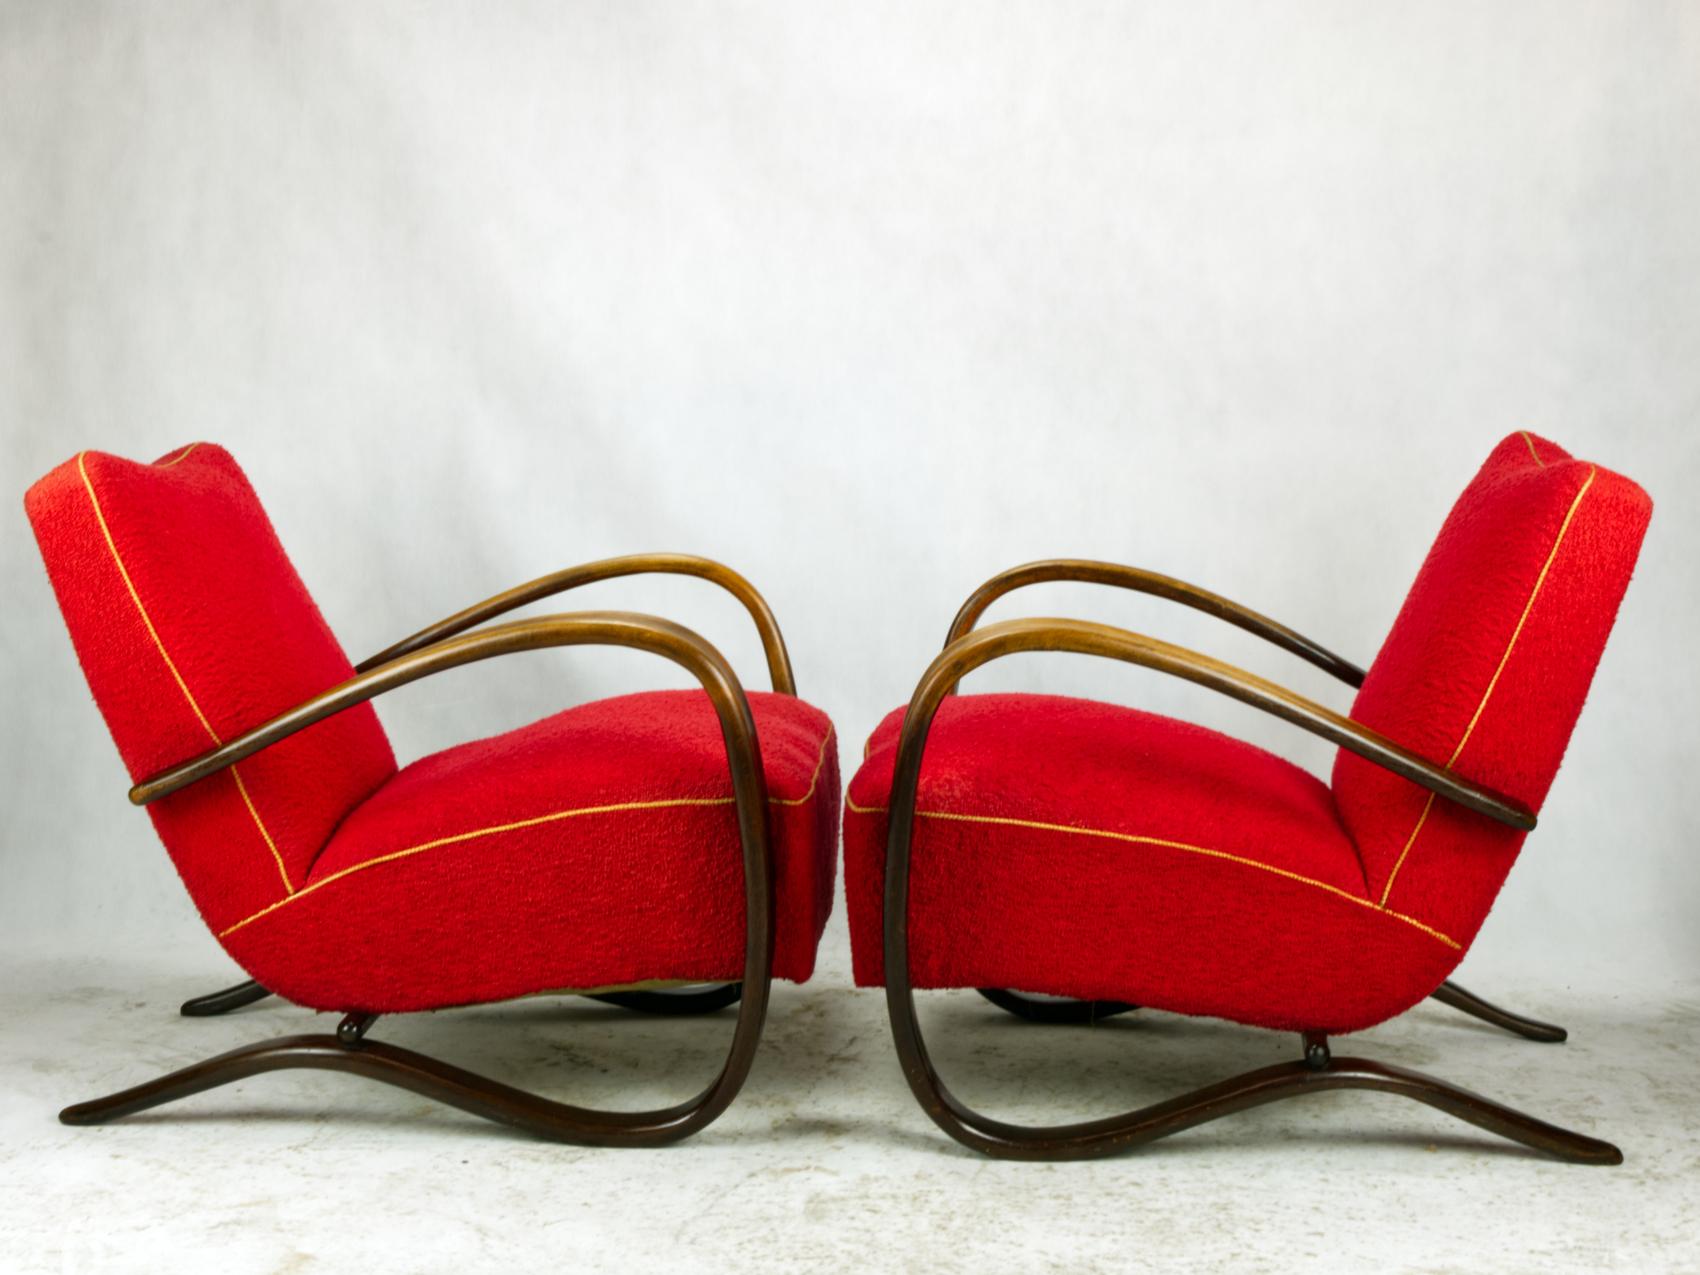 Art Deco Pair of H269 Lounge Chairs by Jindrich Halabala for UP Závody Brno, 1930s